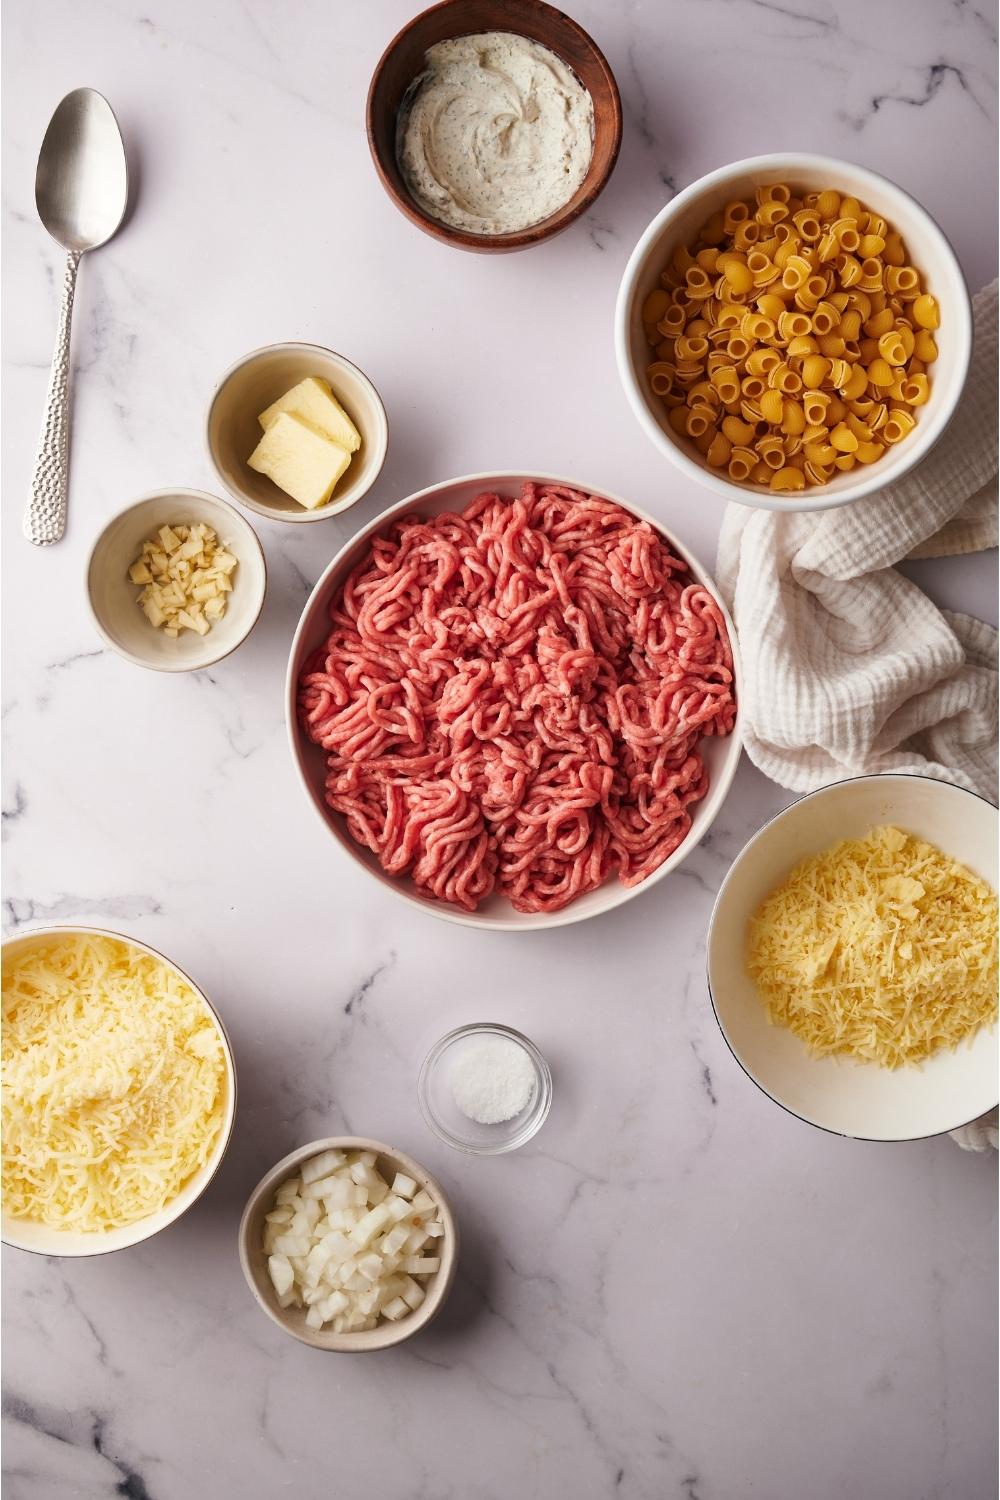 An assortment of ingredients for Philly cheesesteak casserole including bowls of raw beef, cheese, and uncooked pasta noodles.